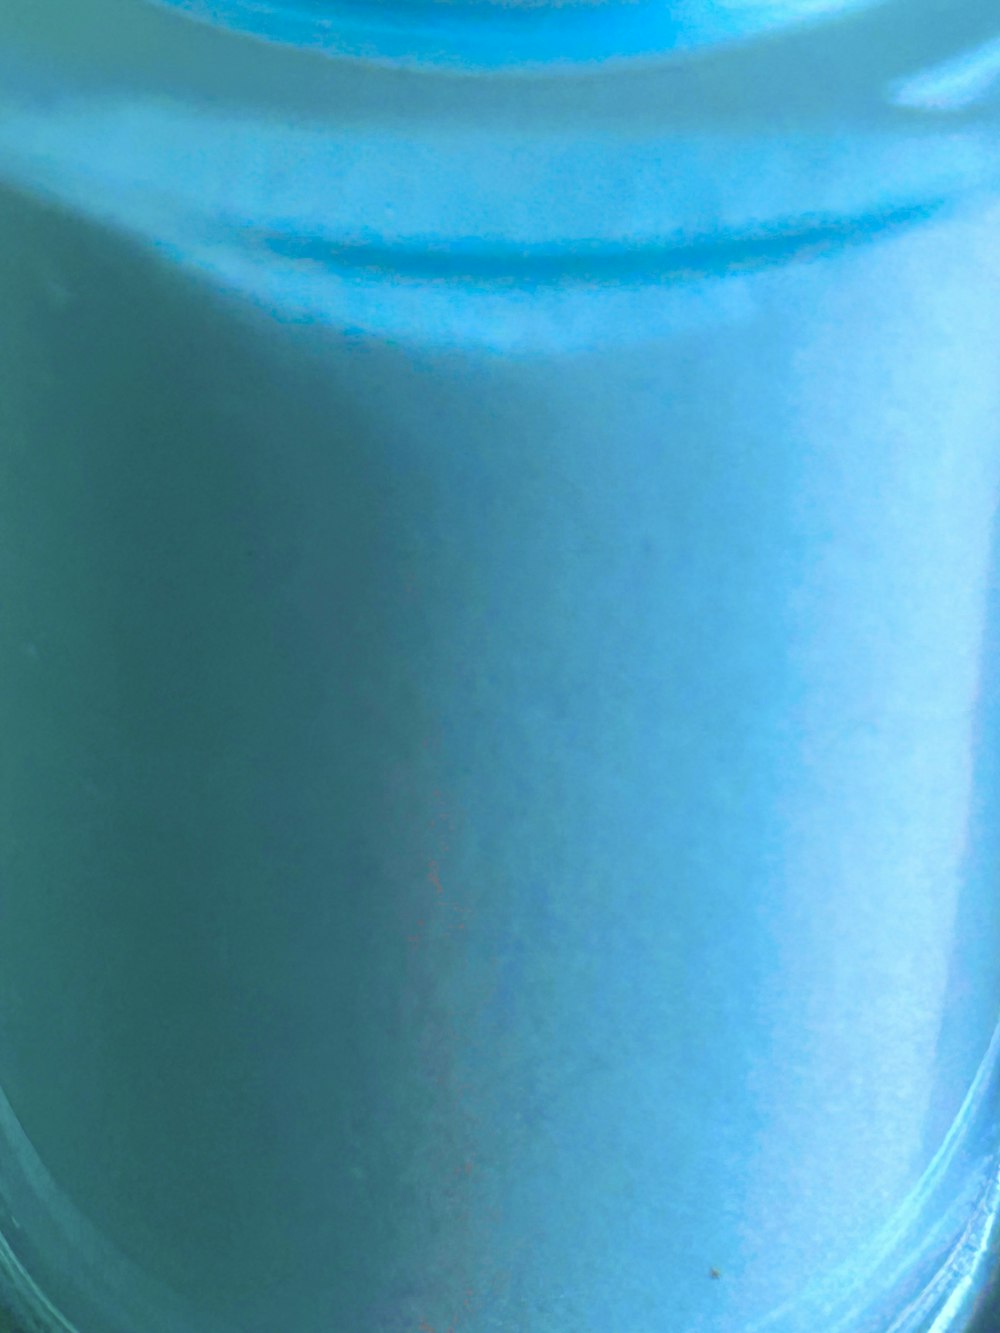 a close up of a blue jar on a table